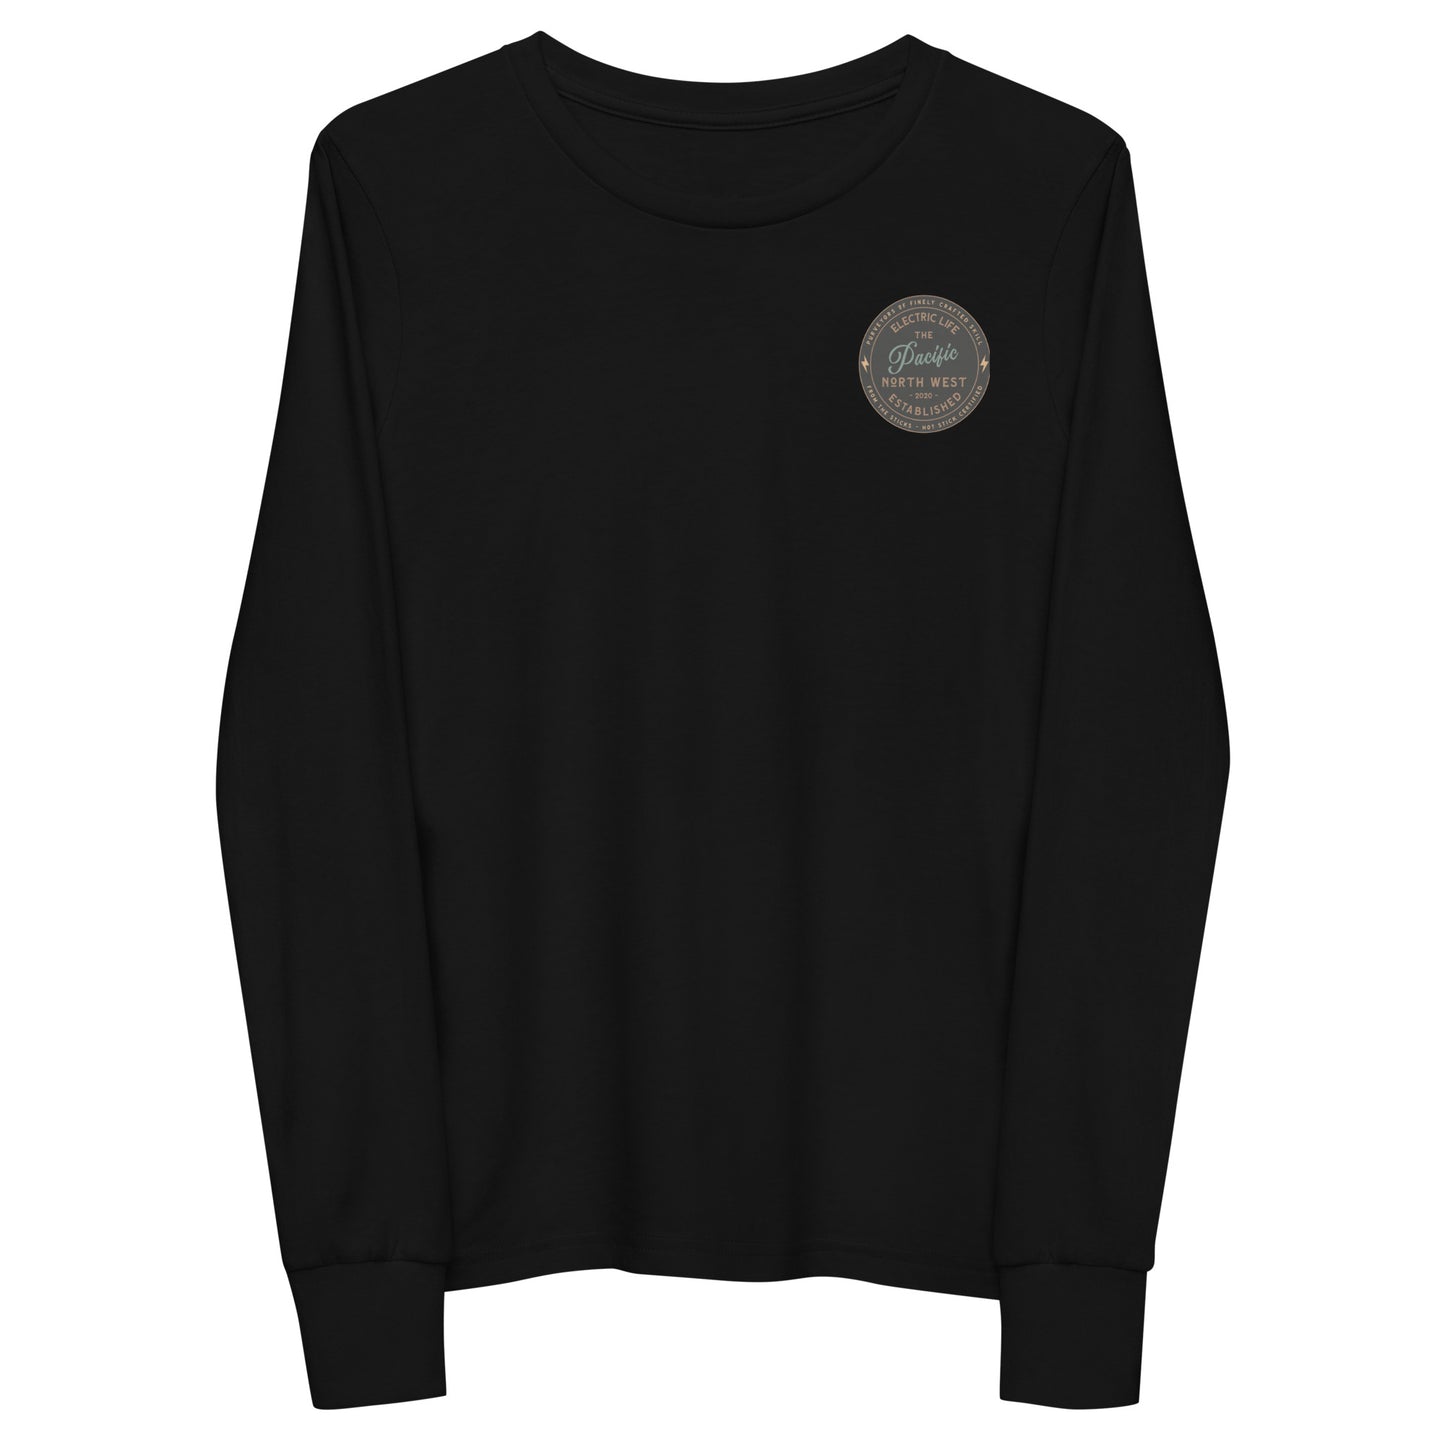 FROM THE STICKS YOUTH LONG SLEEVE